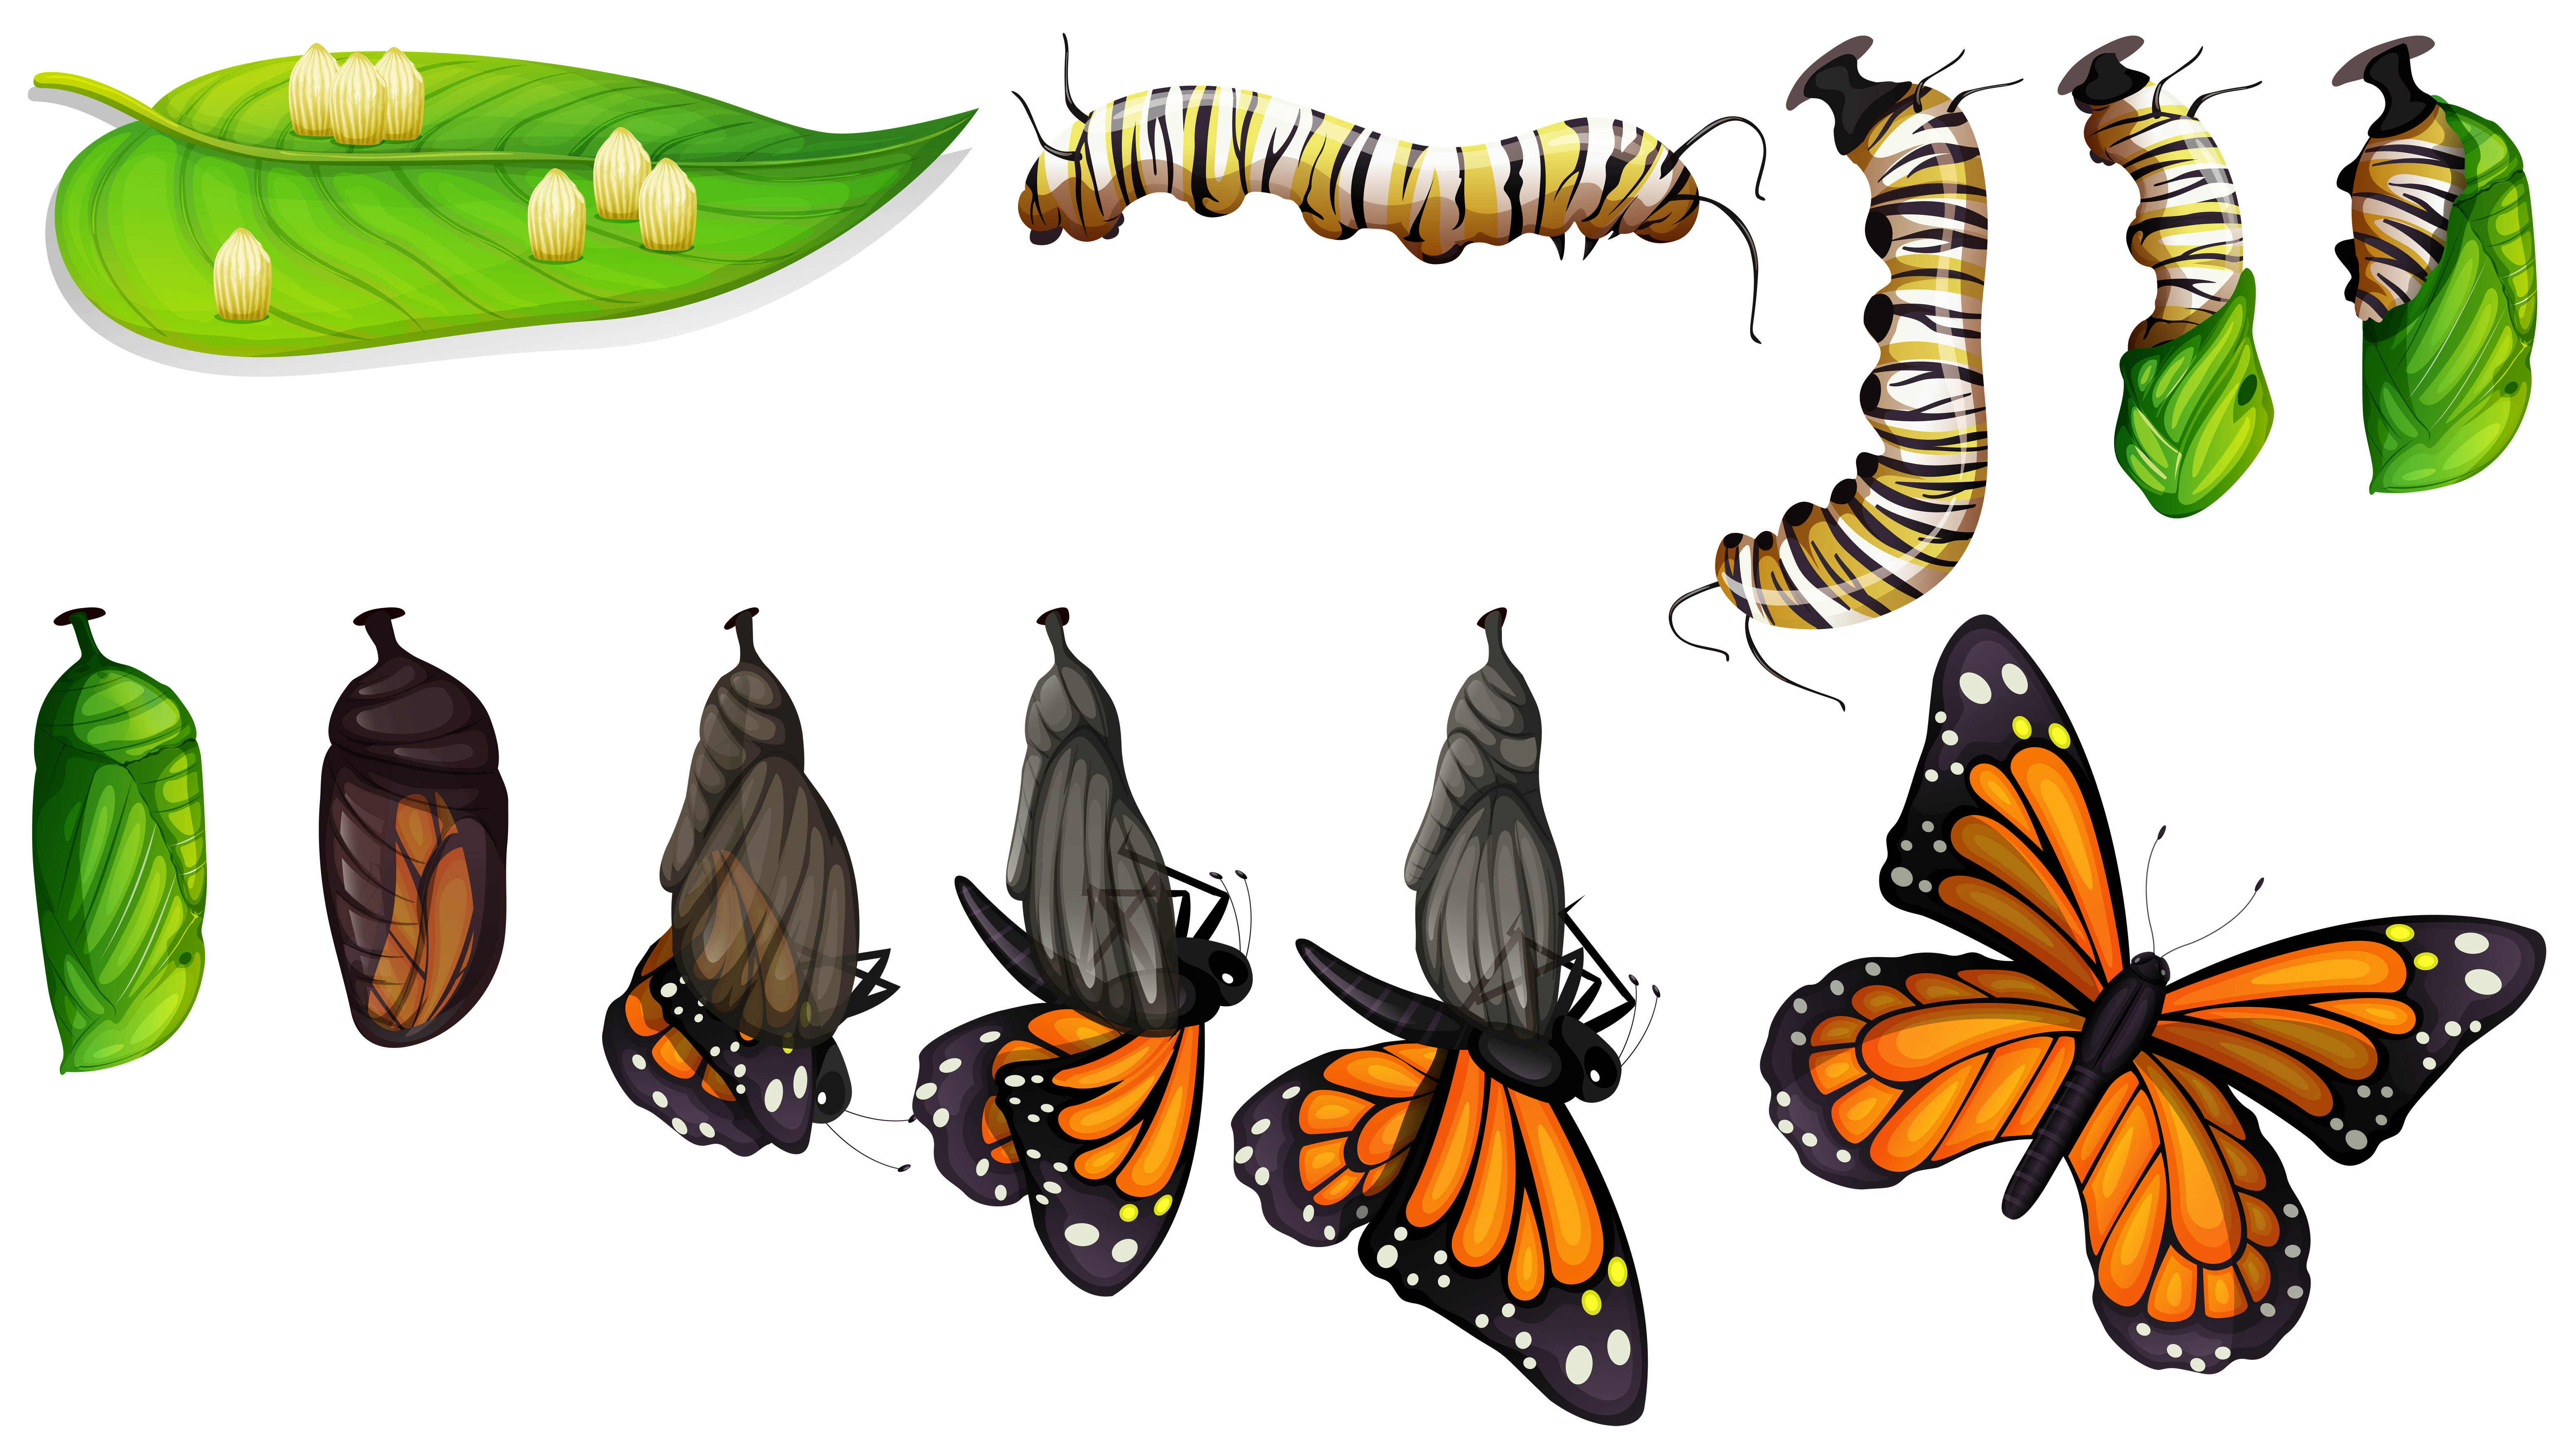 presentation butterfly life cycle